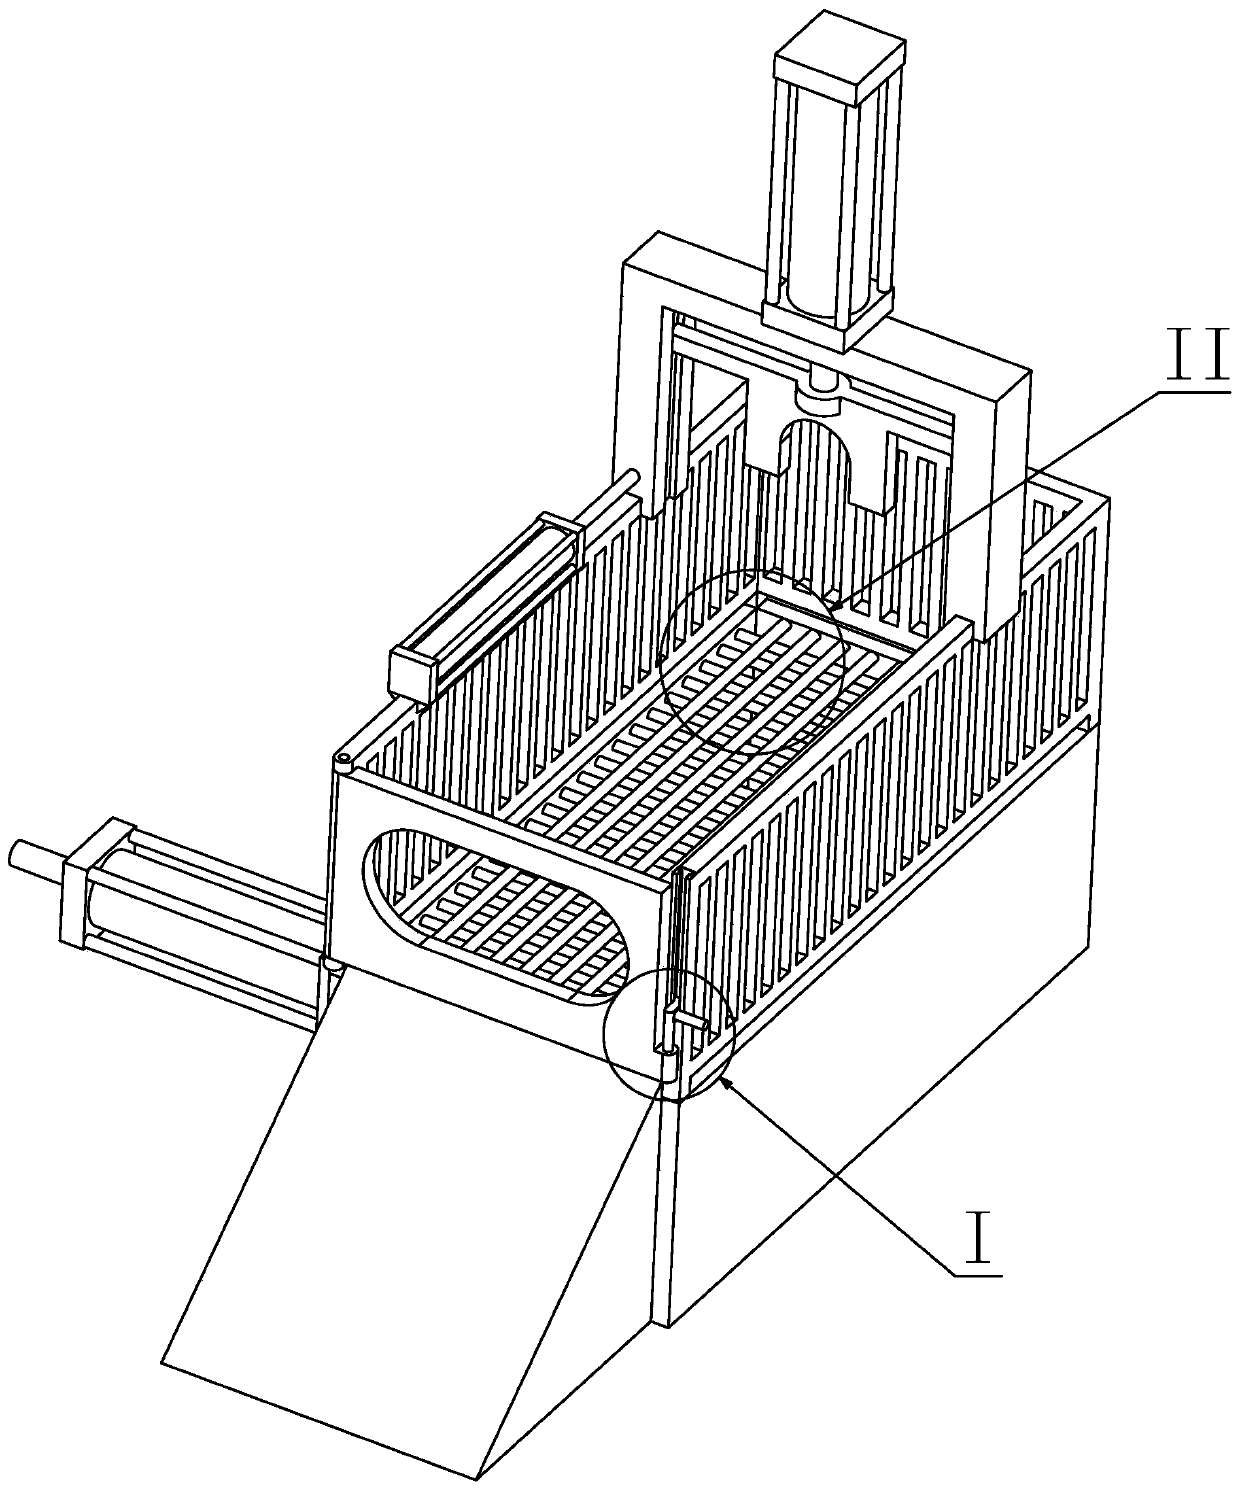 Binding device for cattle slaughtering